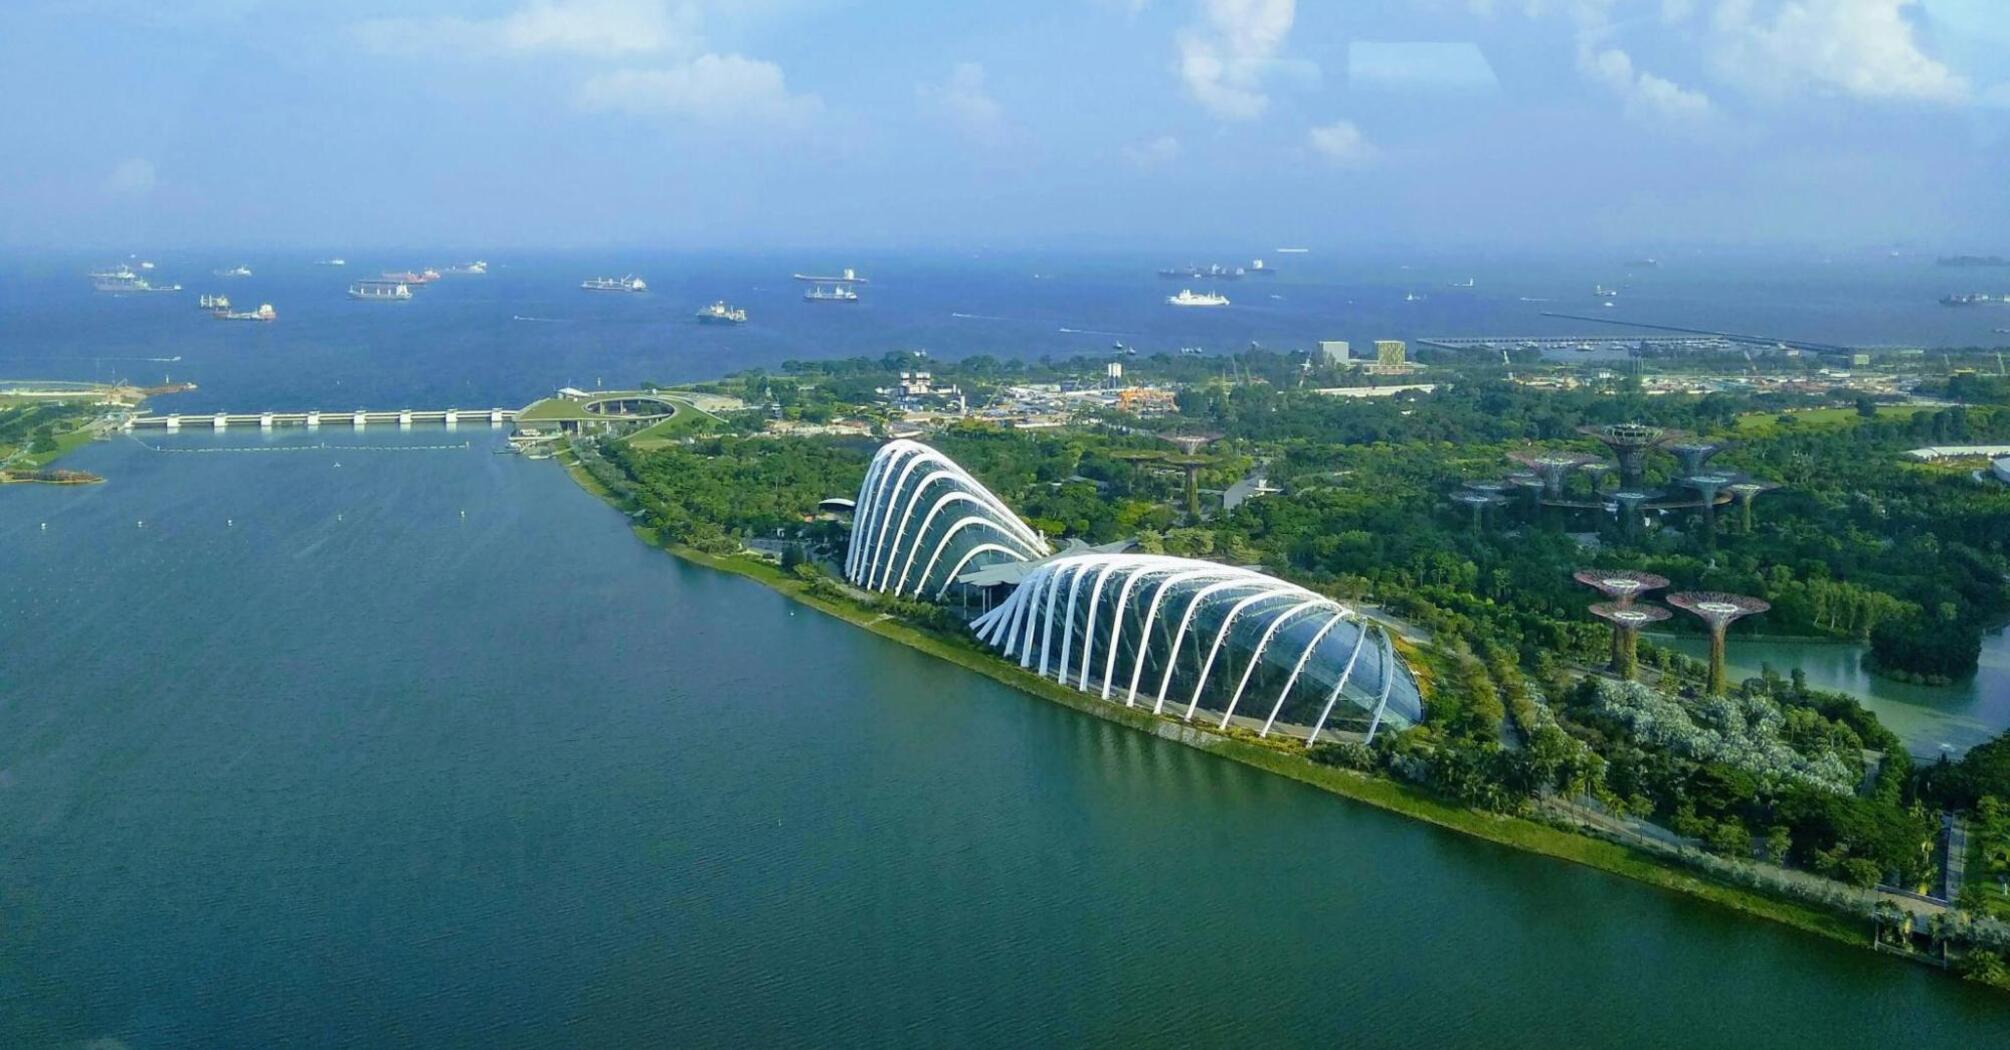 Aerial view of the beautiful Singapore seashore with modern architecture